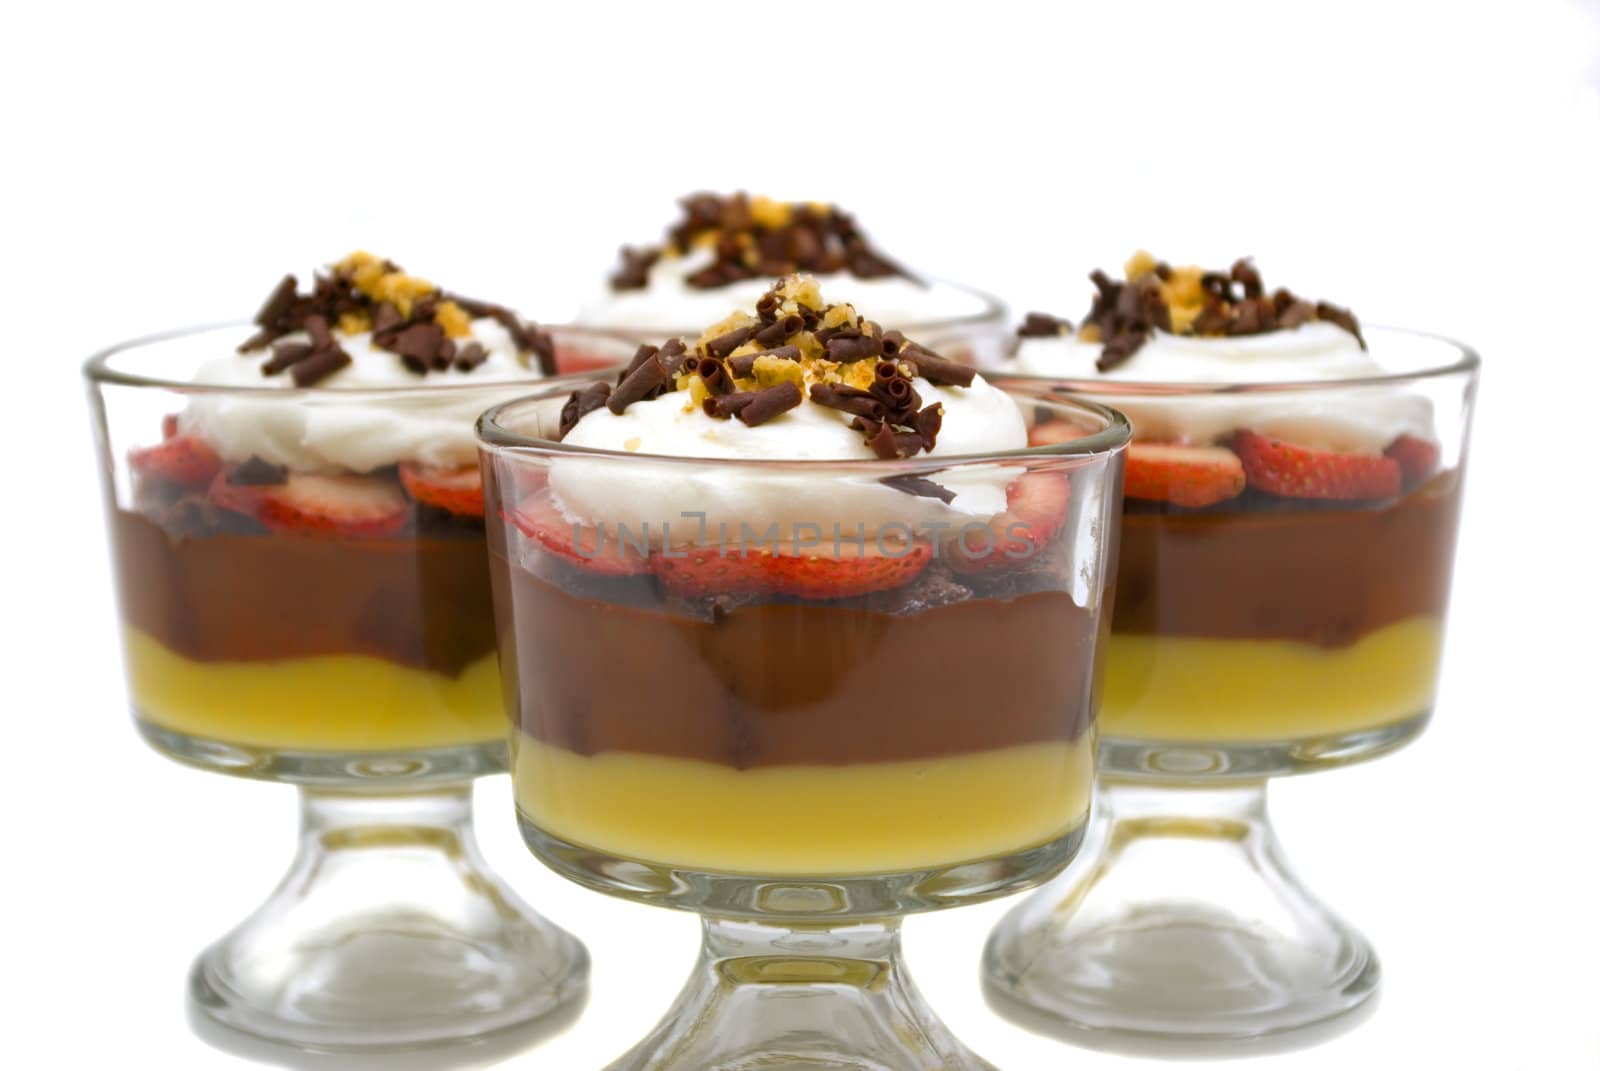 Trifle with chocolate puding, vanilla pudding, strawberries, chocolate cake pieces, whip cream, walnuts and chocolate curls